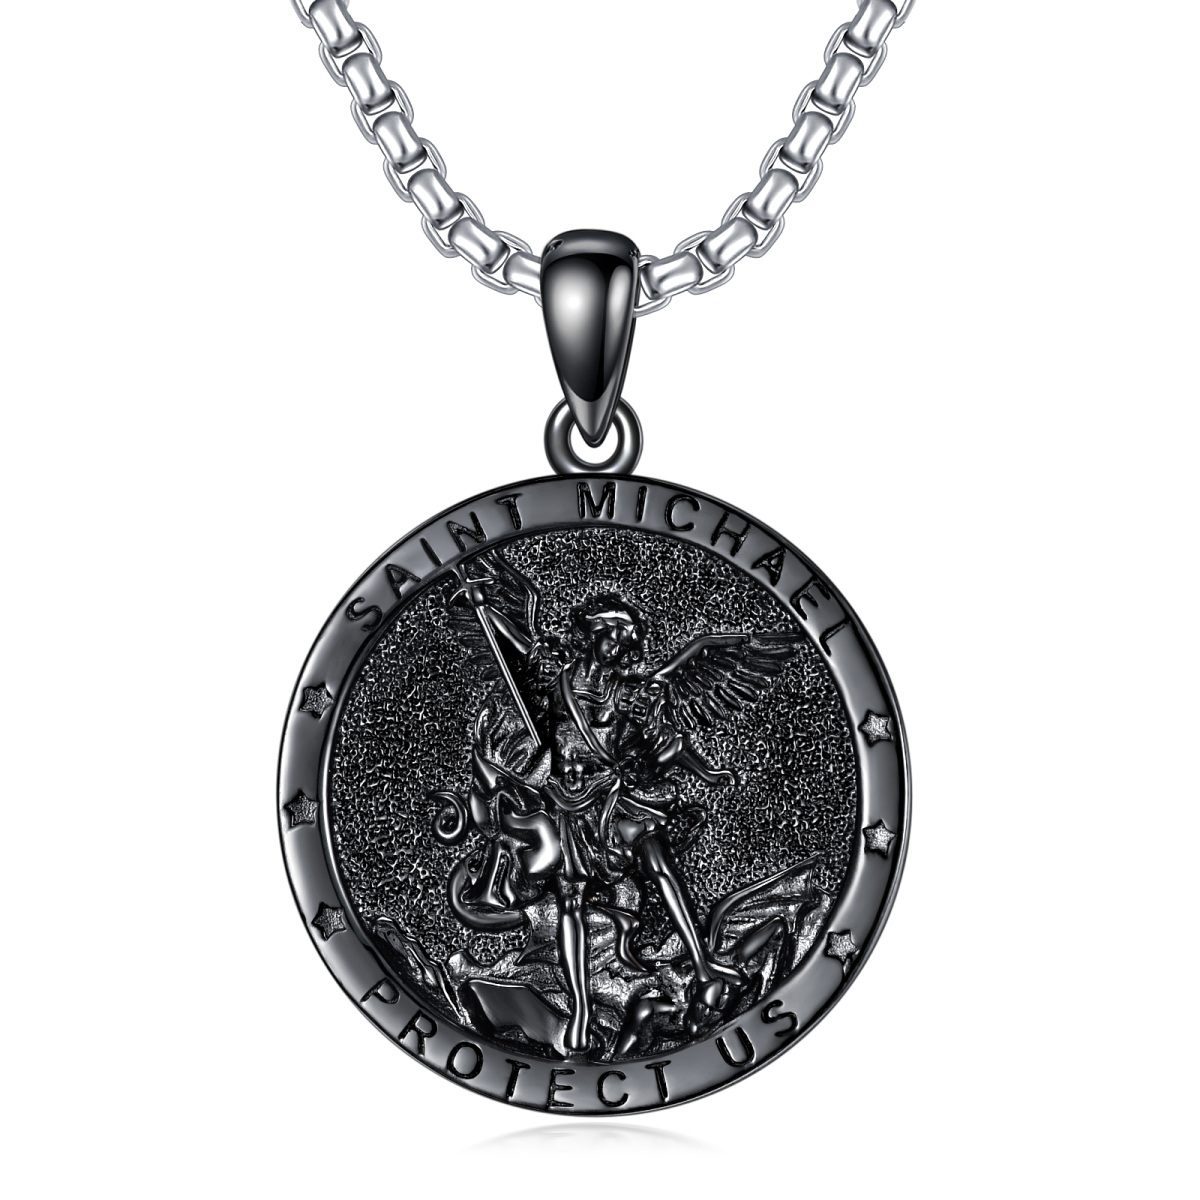 Sterling Silver with Black Rhodium Color Saint Michael Pendant Necklace with Engraved Word for Men-1